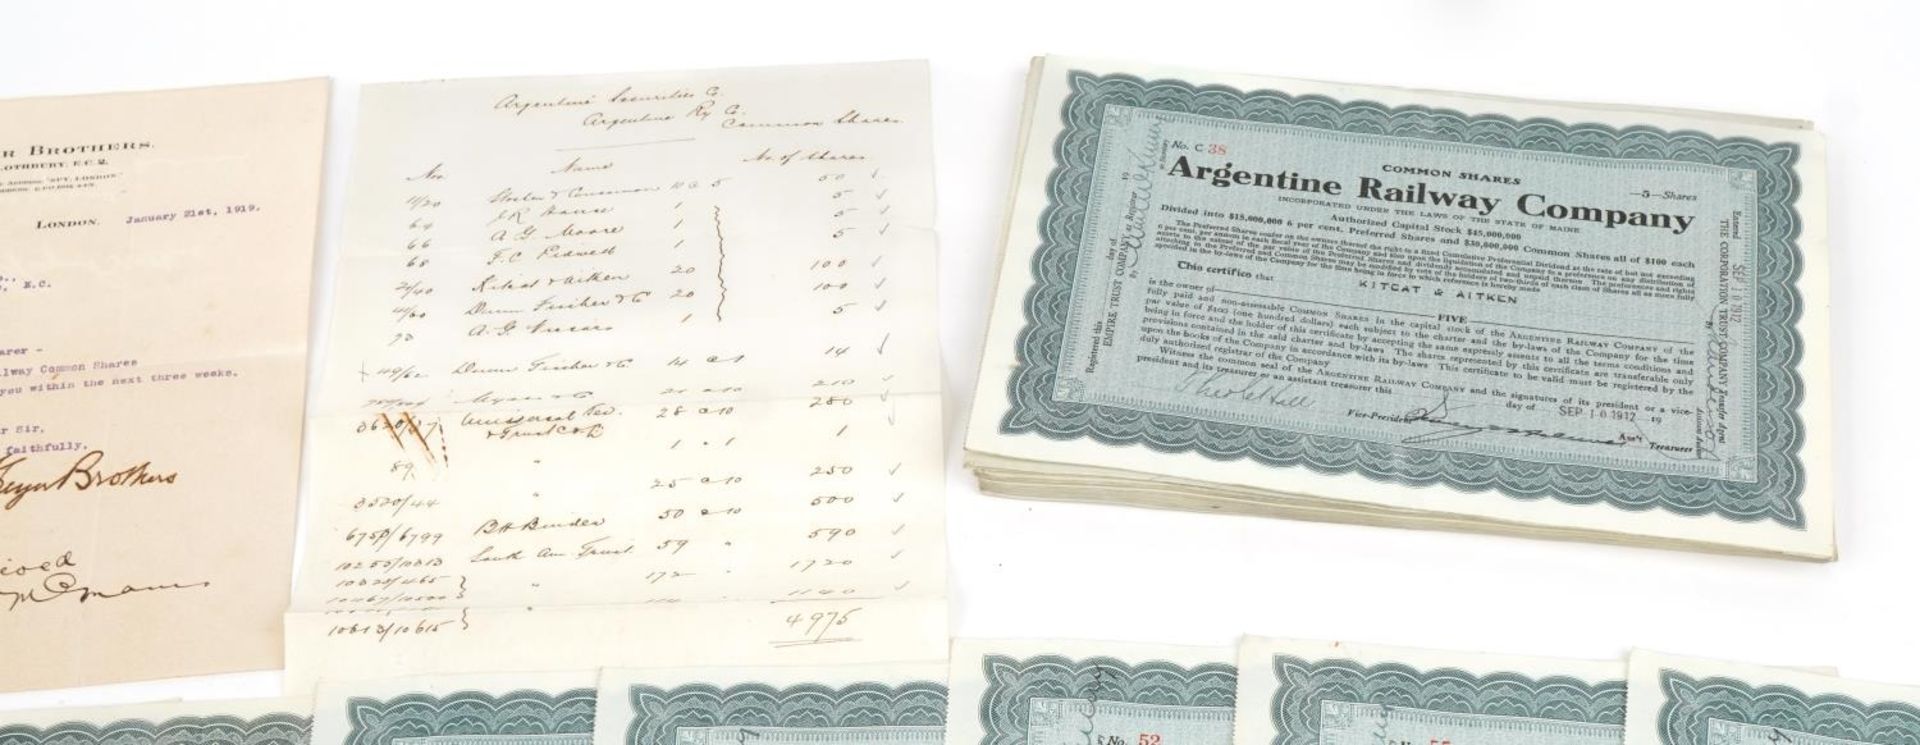 Extensive collection of early 20th century Argentine Railway Company share certificates - Image 3 of 6